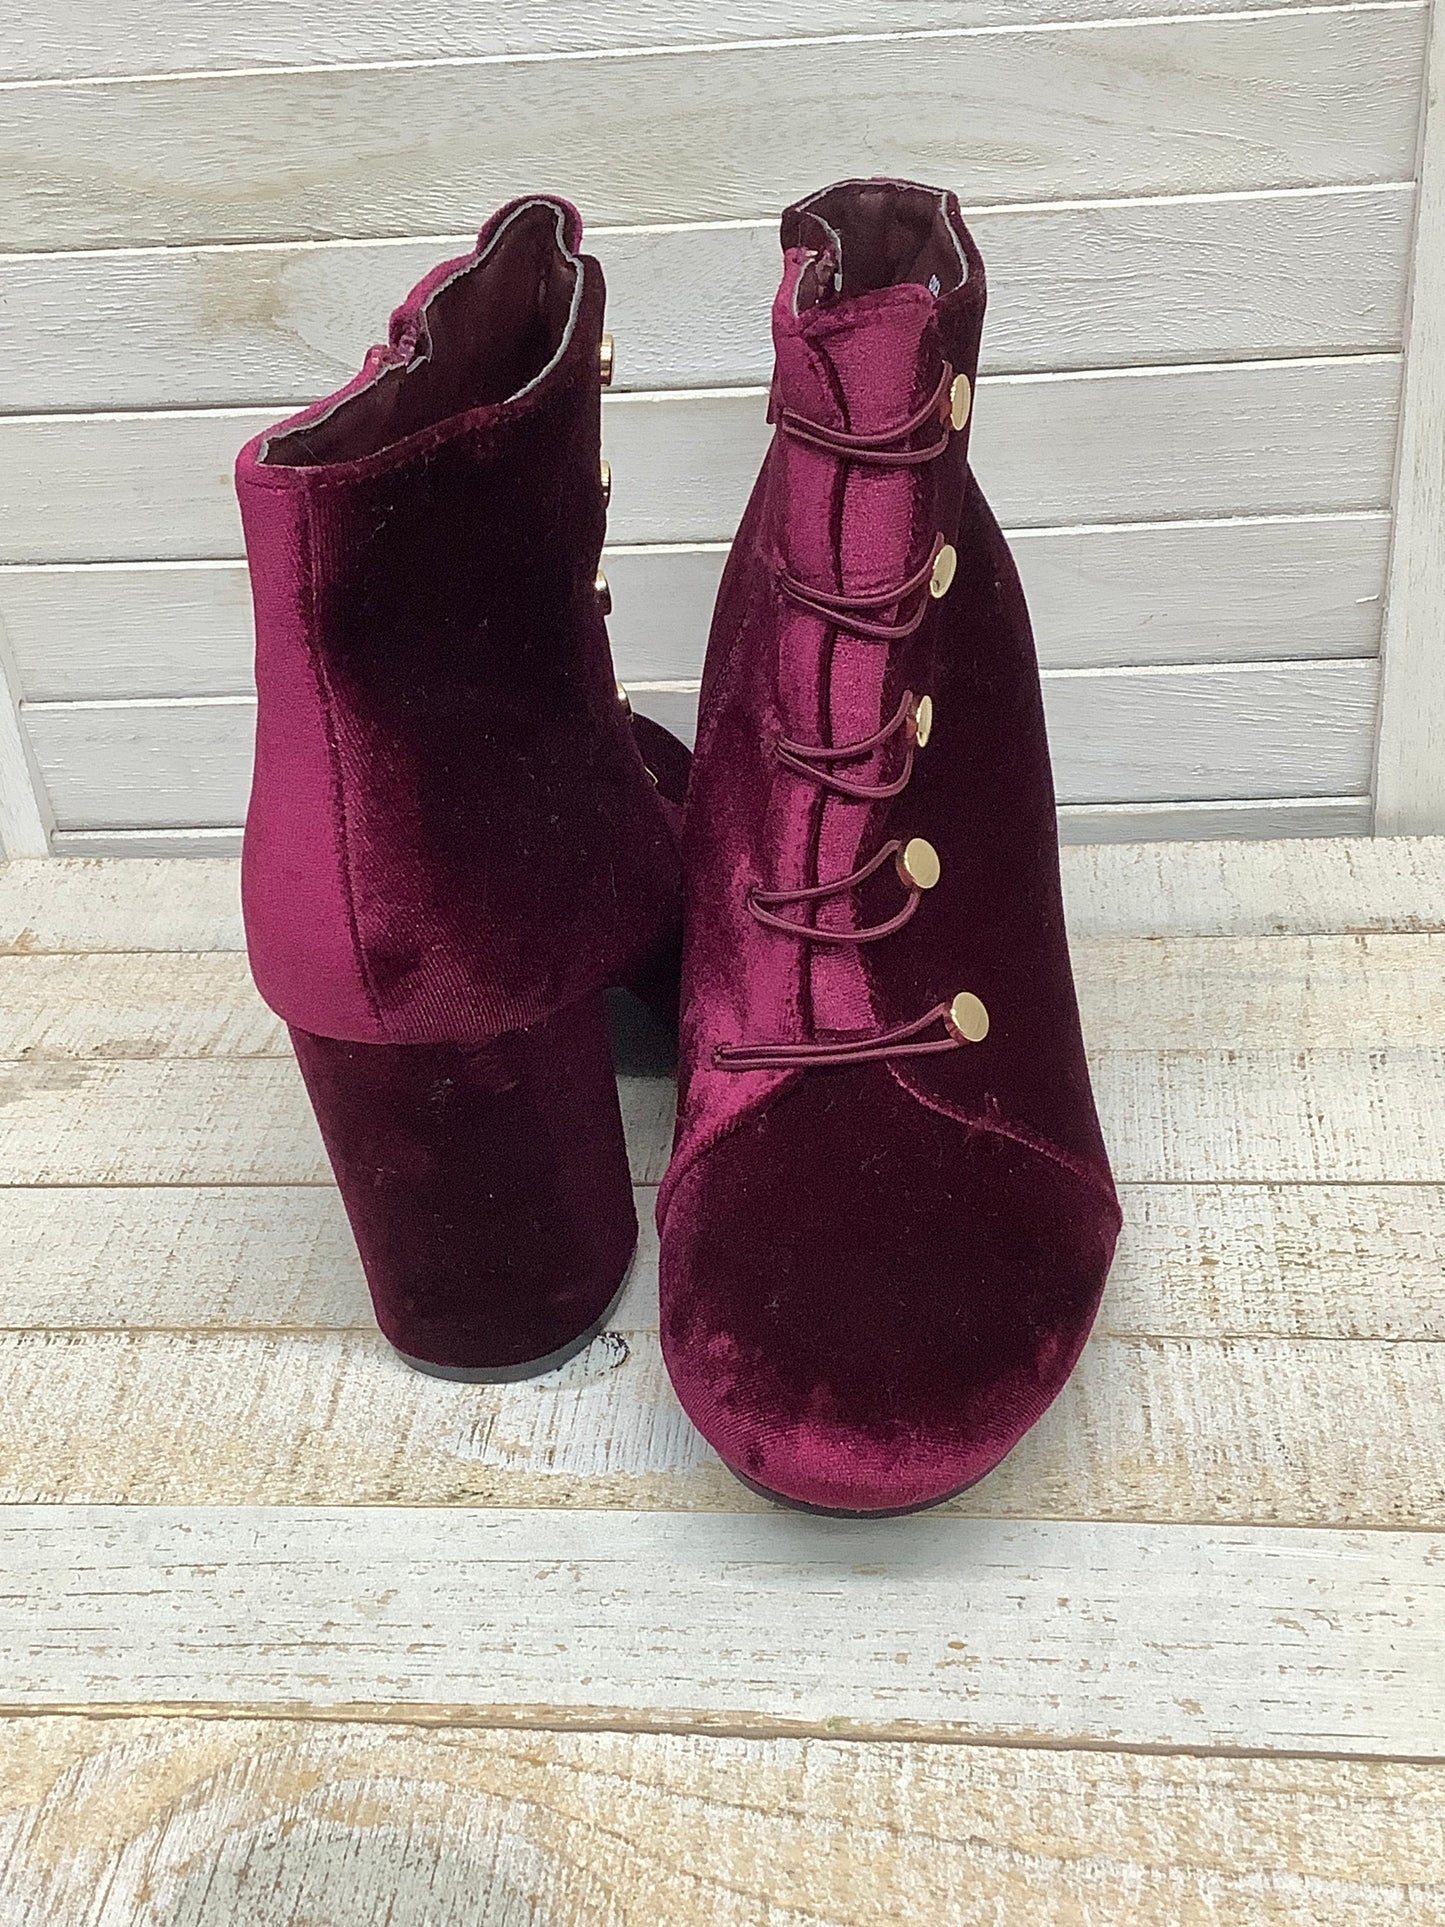 Boots Ankle Heels By Just Fabulous  Size: 8.5